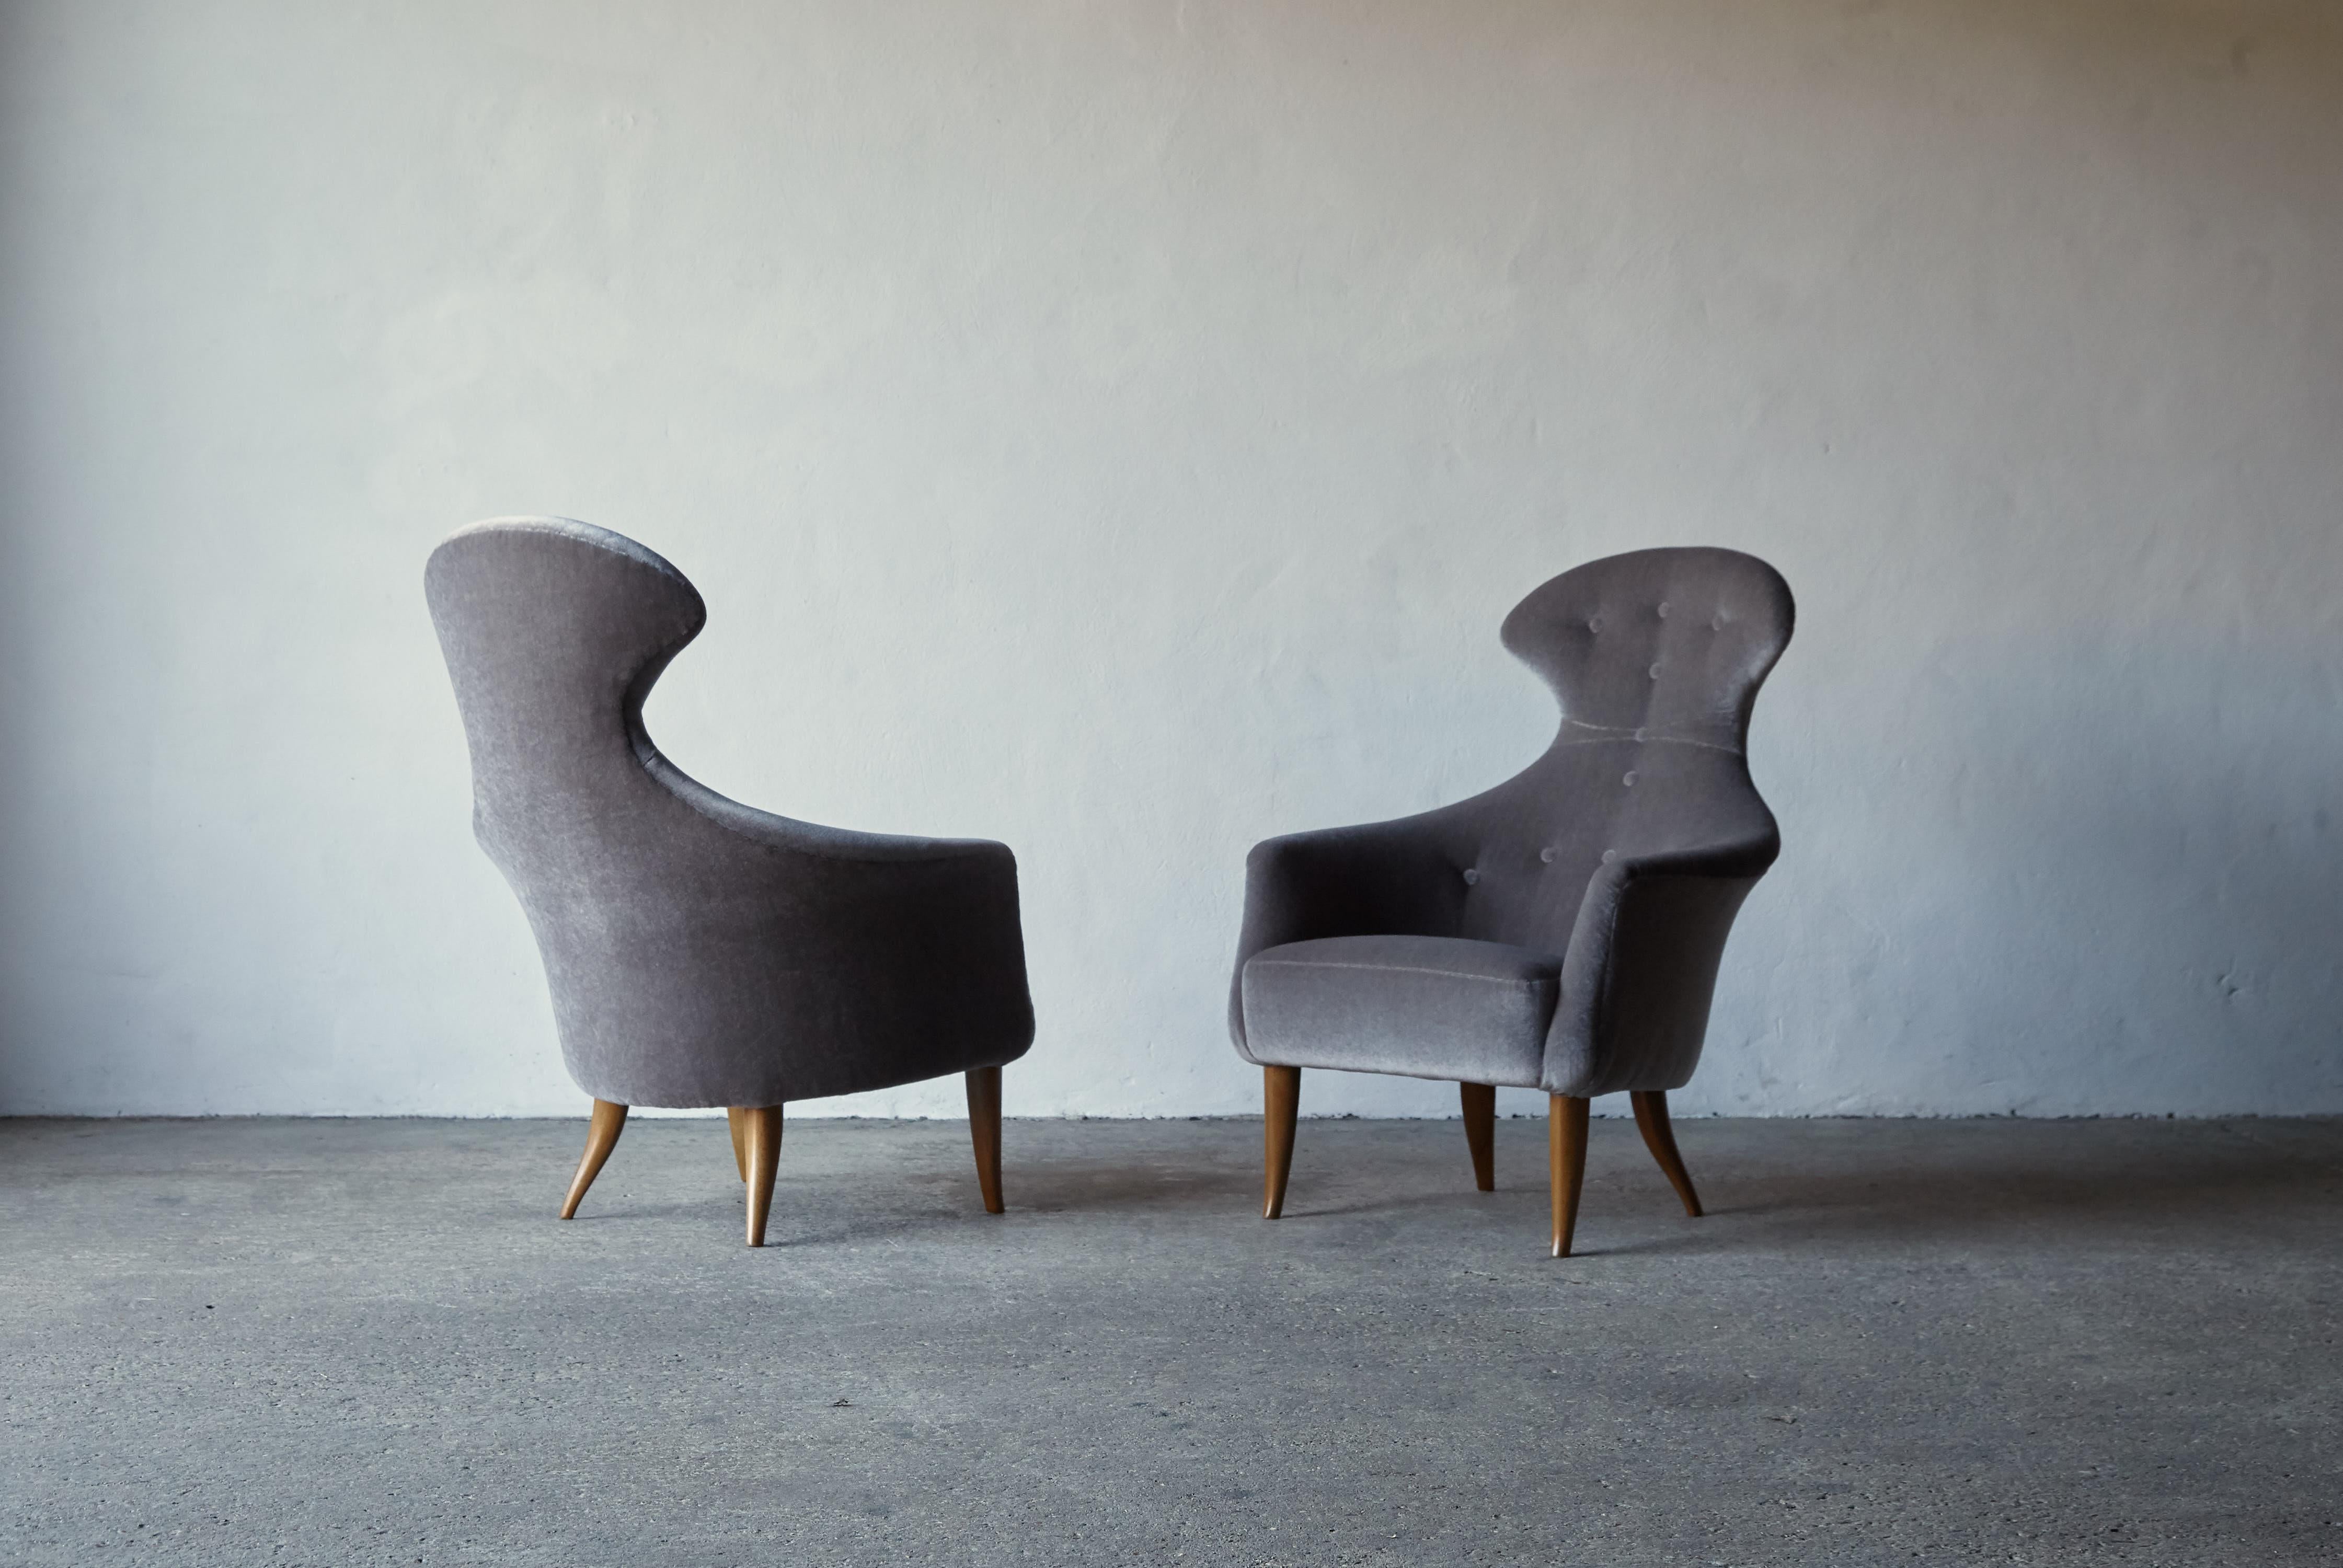 A pair of Kerstin Horlin Holmquist Stora Eva chairs, newly upholstered in premium pure mohair fabric,  designed in 1958 and produced by Nordiska Kompaniet (NK) as part of the Triva series in Sweden.   Fast shipping worldwide.

